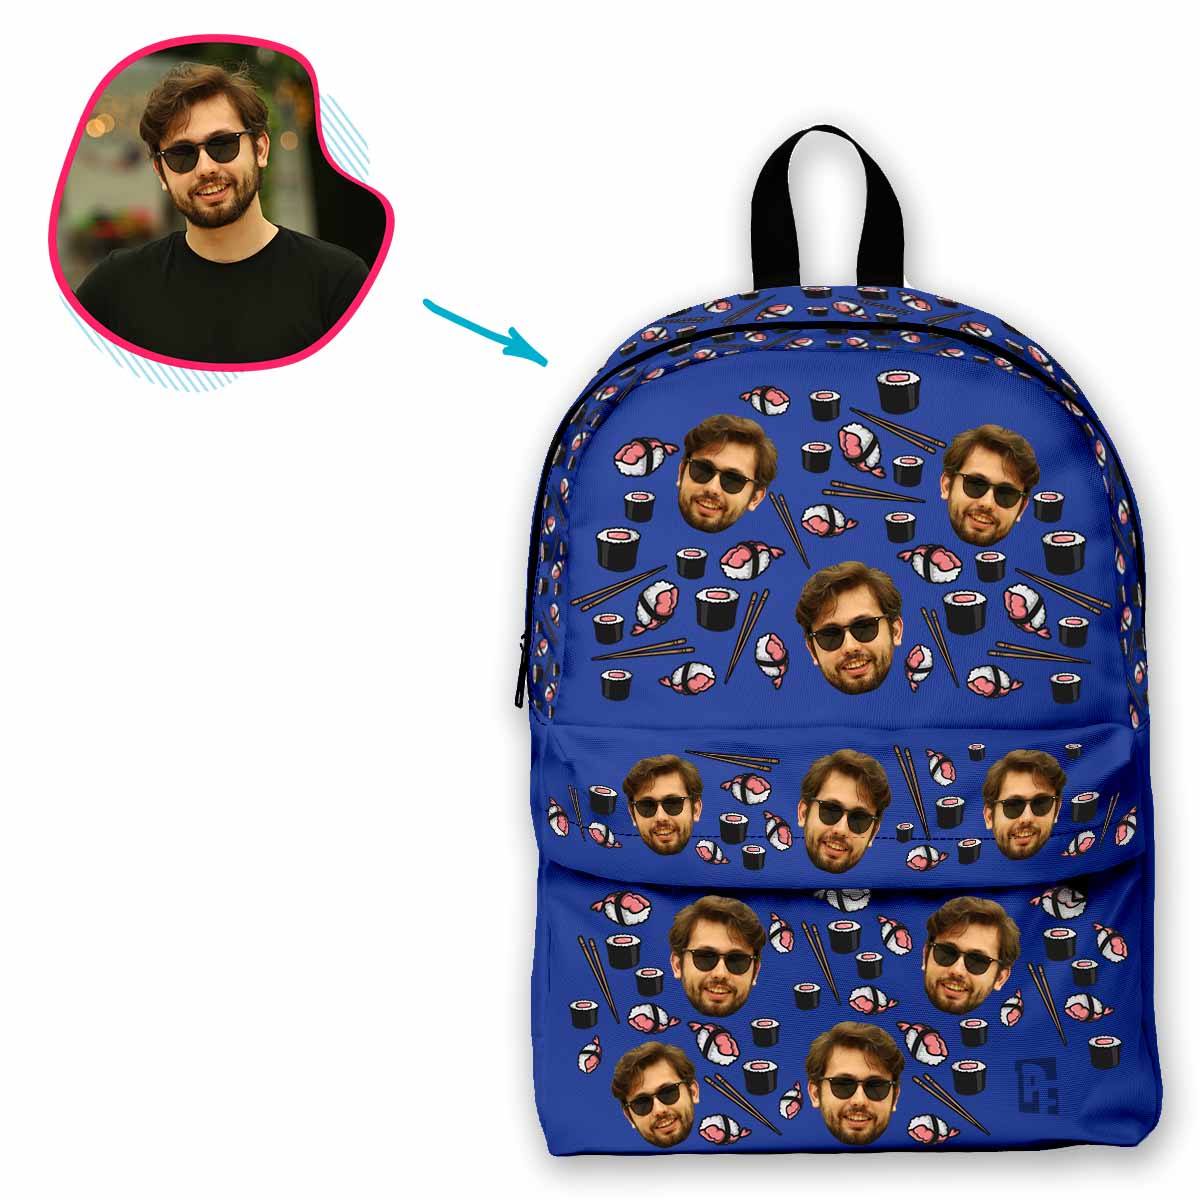 darkblue Sushi classic backpack personalized with photo of face printed on it